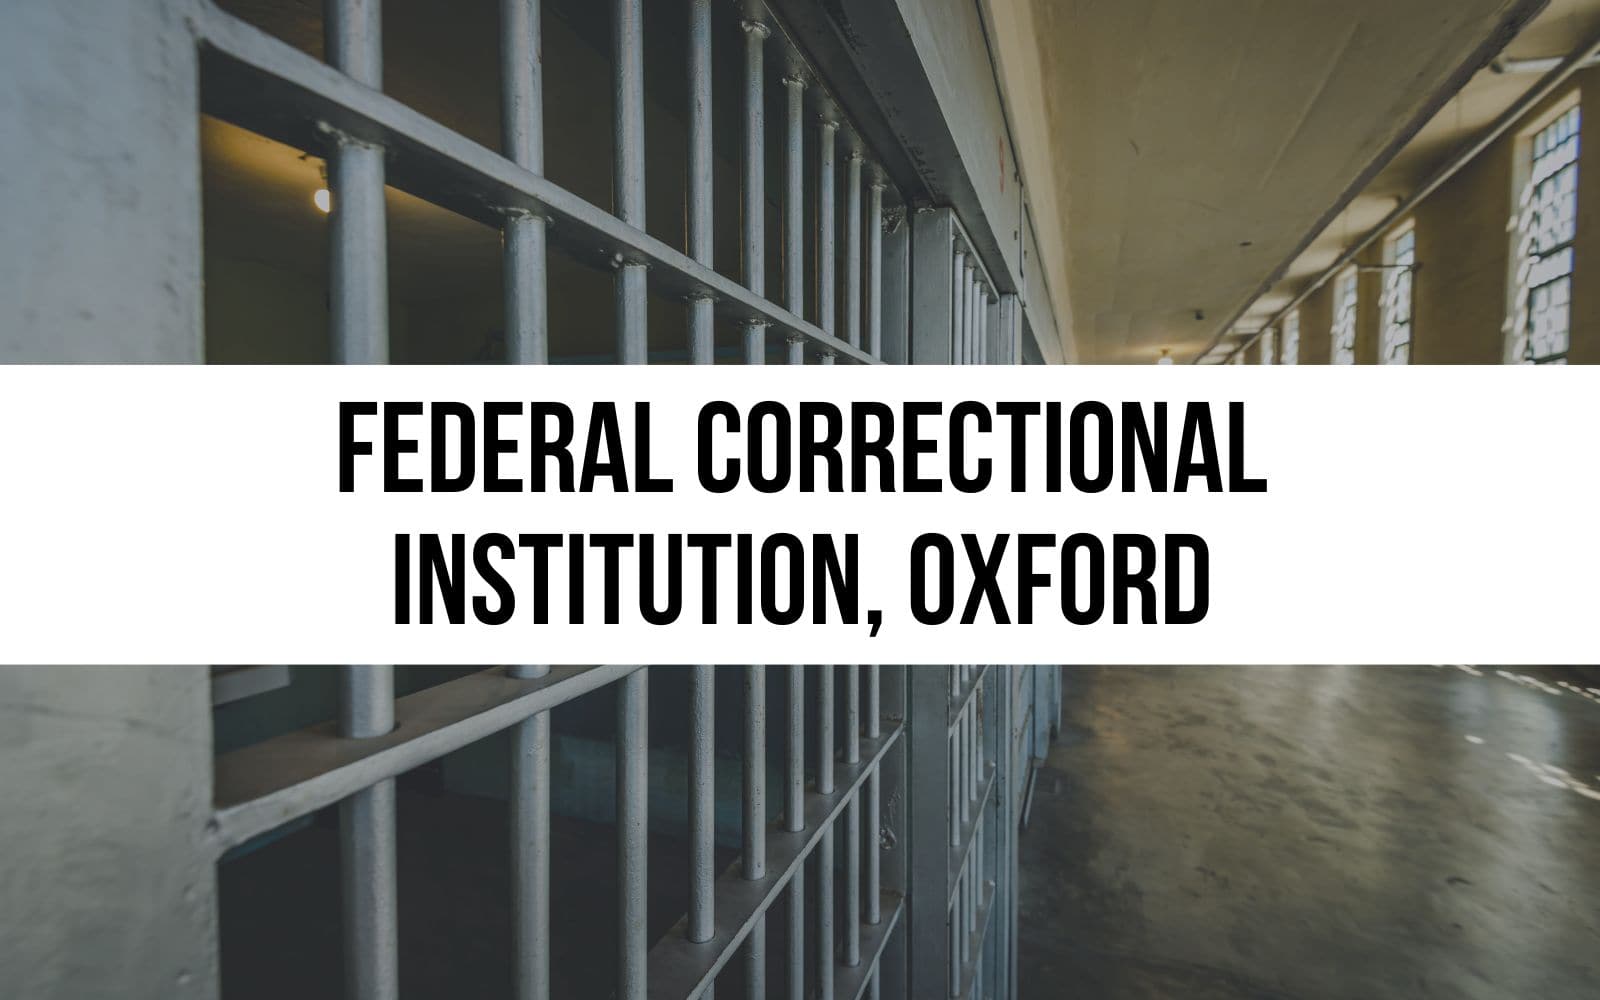 Federal Correctional Institution, Oxford